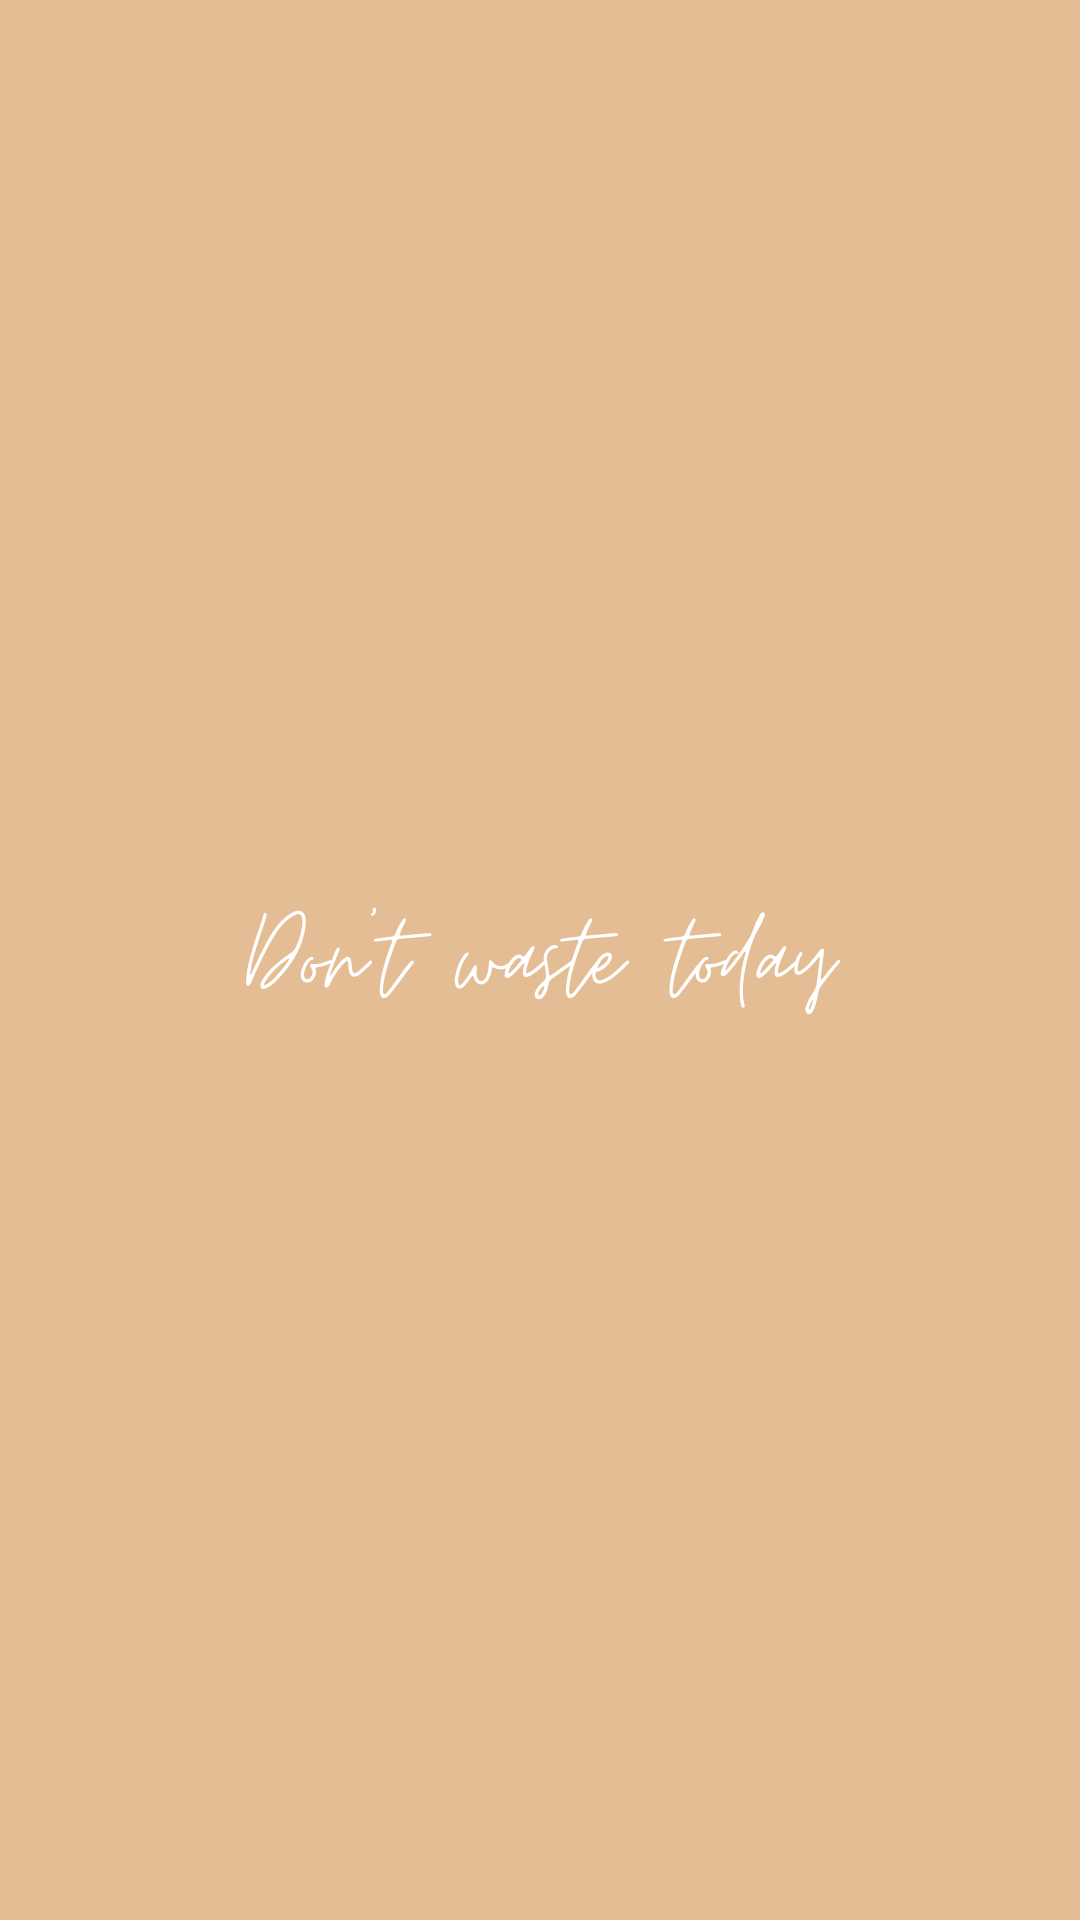 Don't waste today (iPhone Wallpaper). Aesthetic iphone wallpaper, Picture collage wall, Aesthetic picture